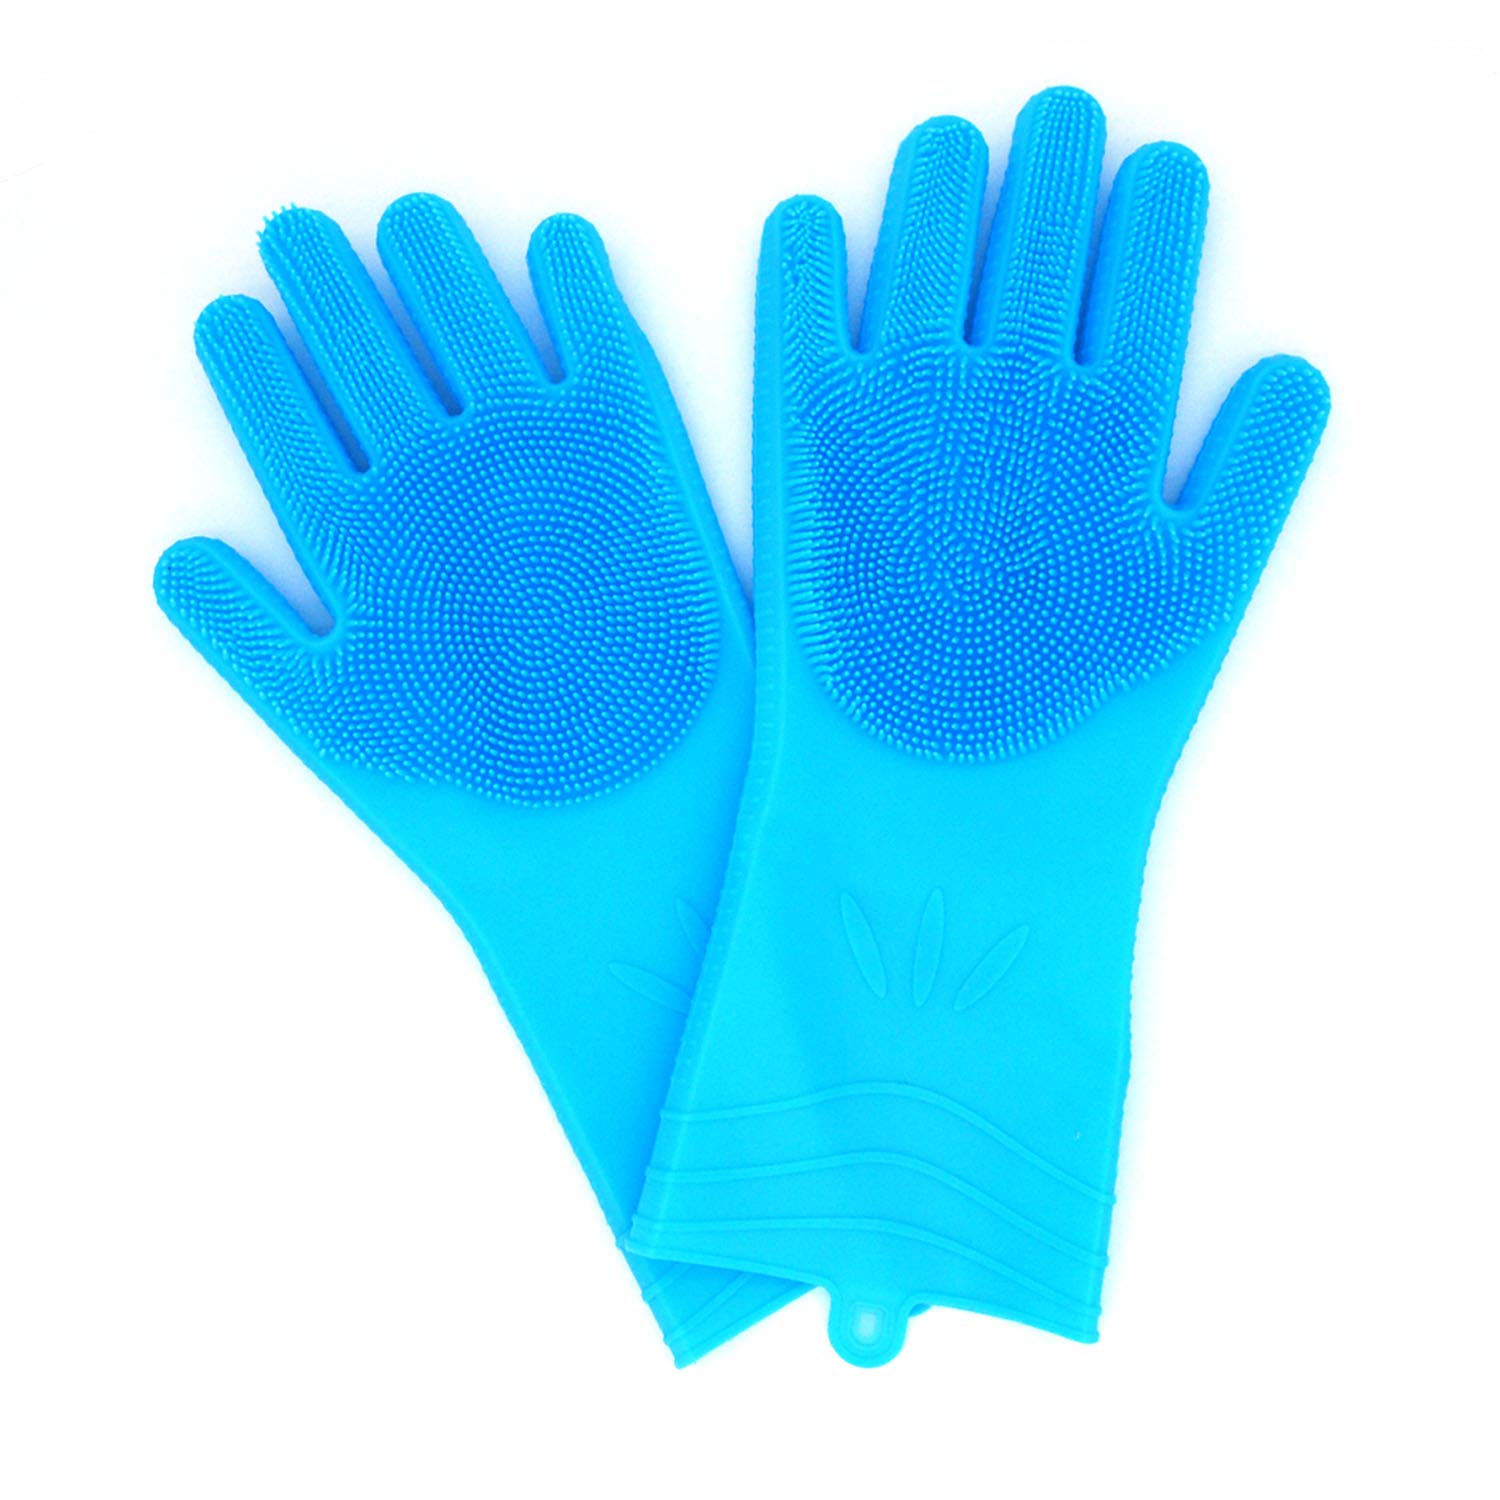 Dishwashing Gloves Silicone Reusable 2 sided Foaming Heat Resistant Scrubber for Kitchen 1 Pair